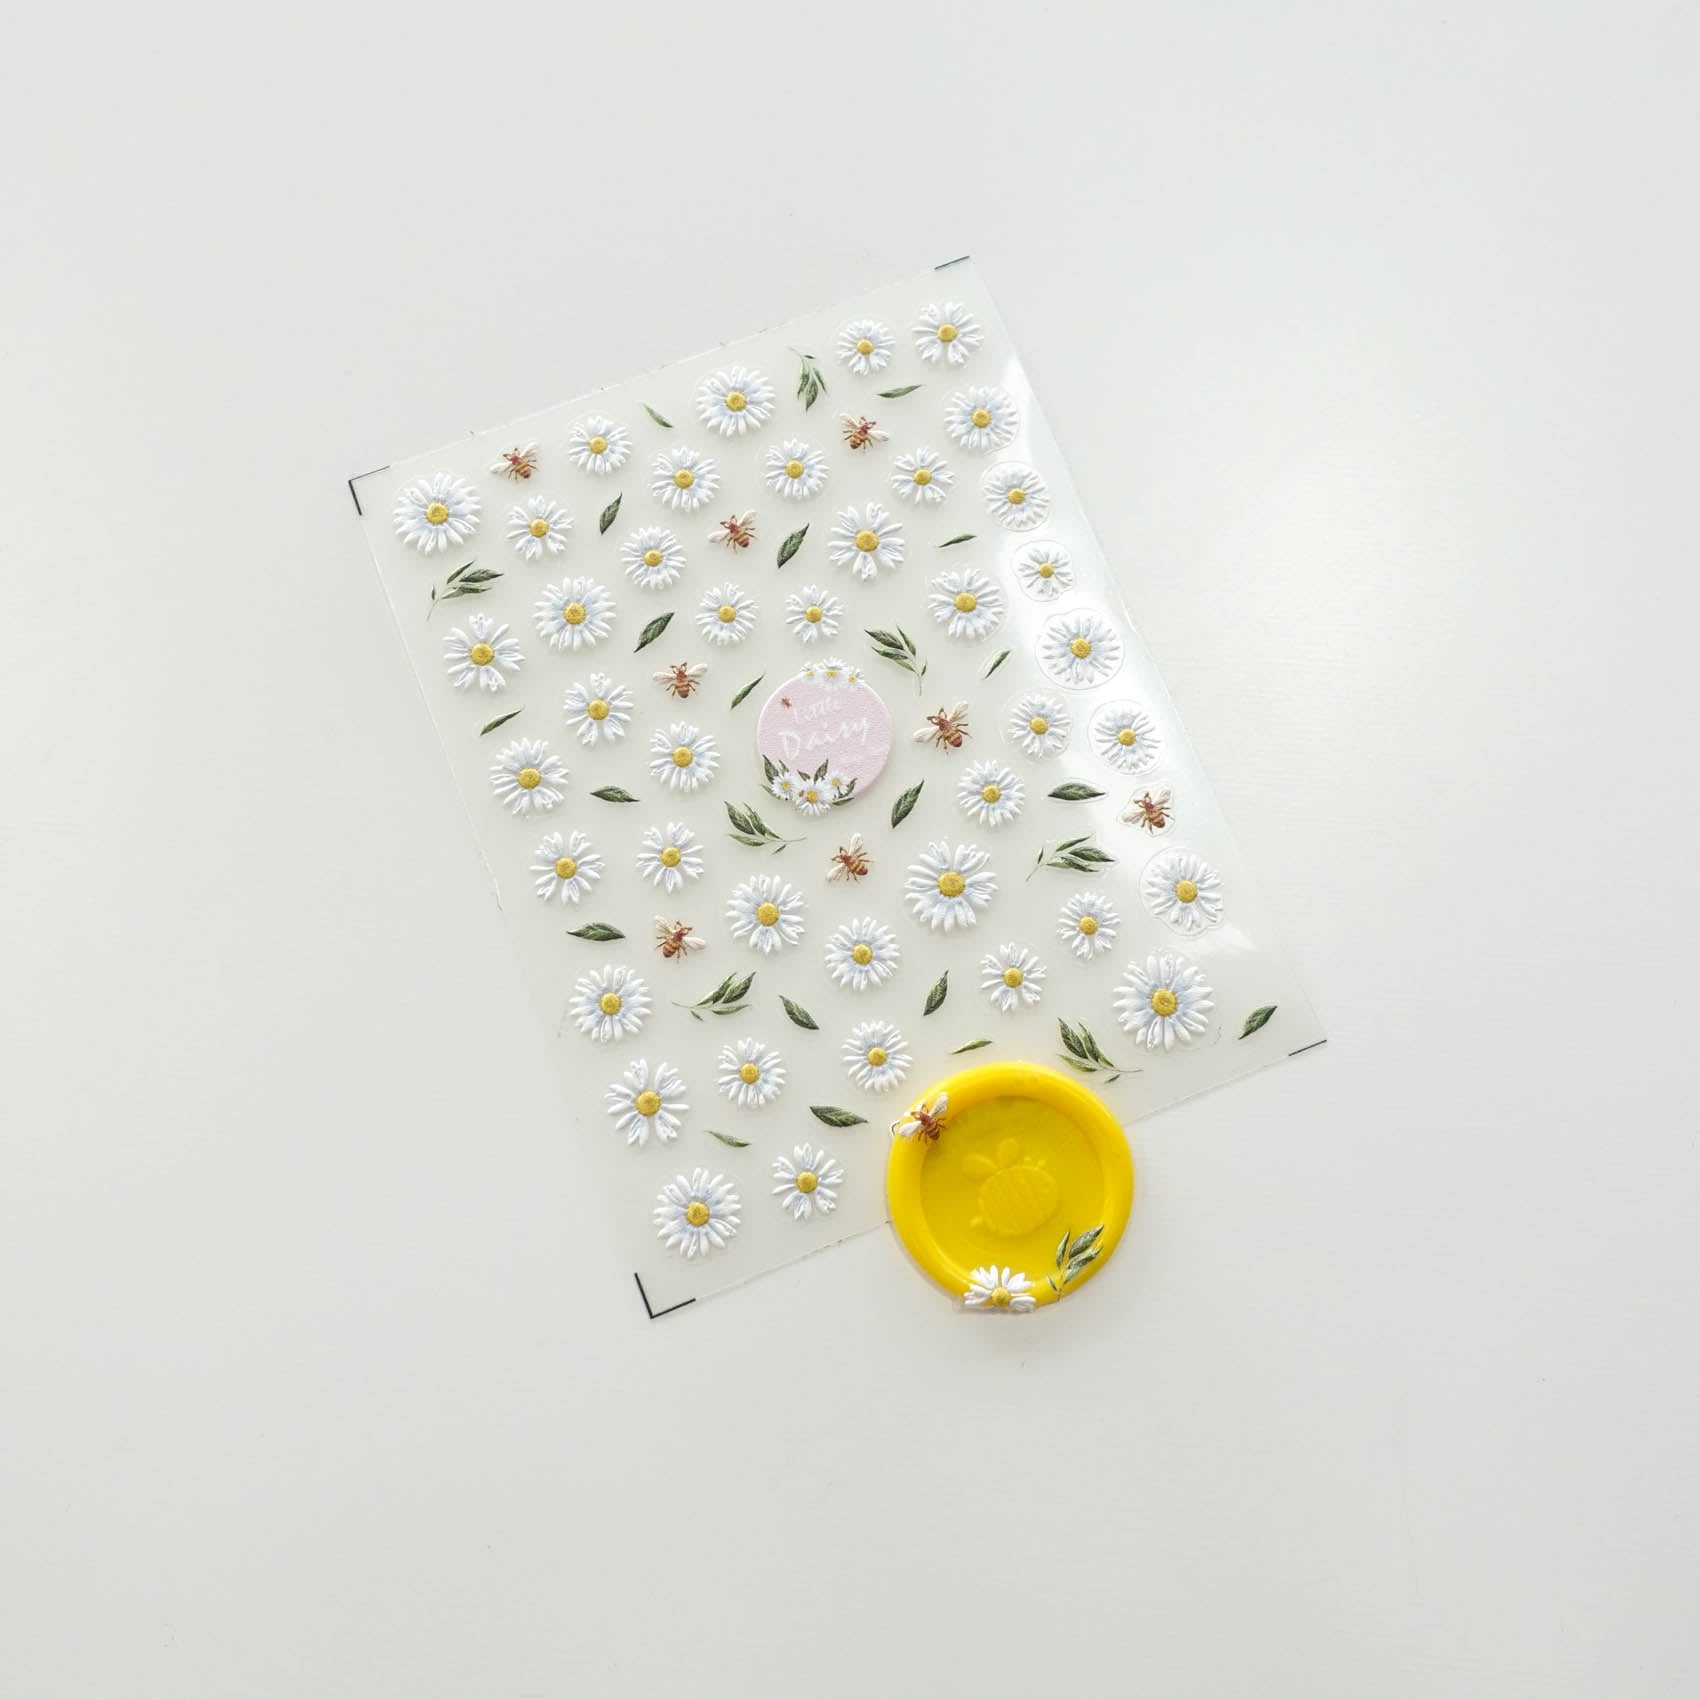 Daisy Bee 3D Clear-Backed Decorative Stickers Sheet